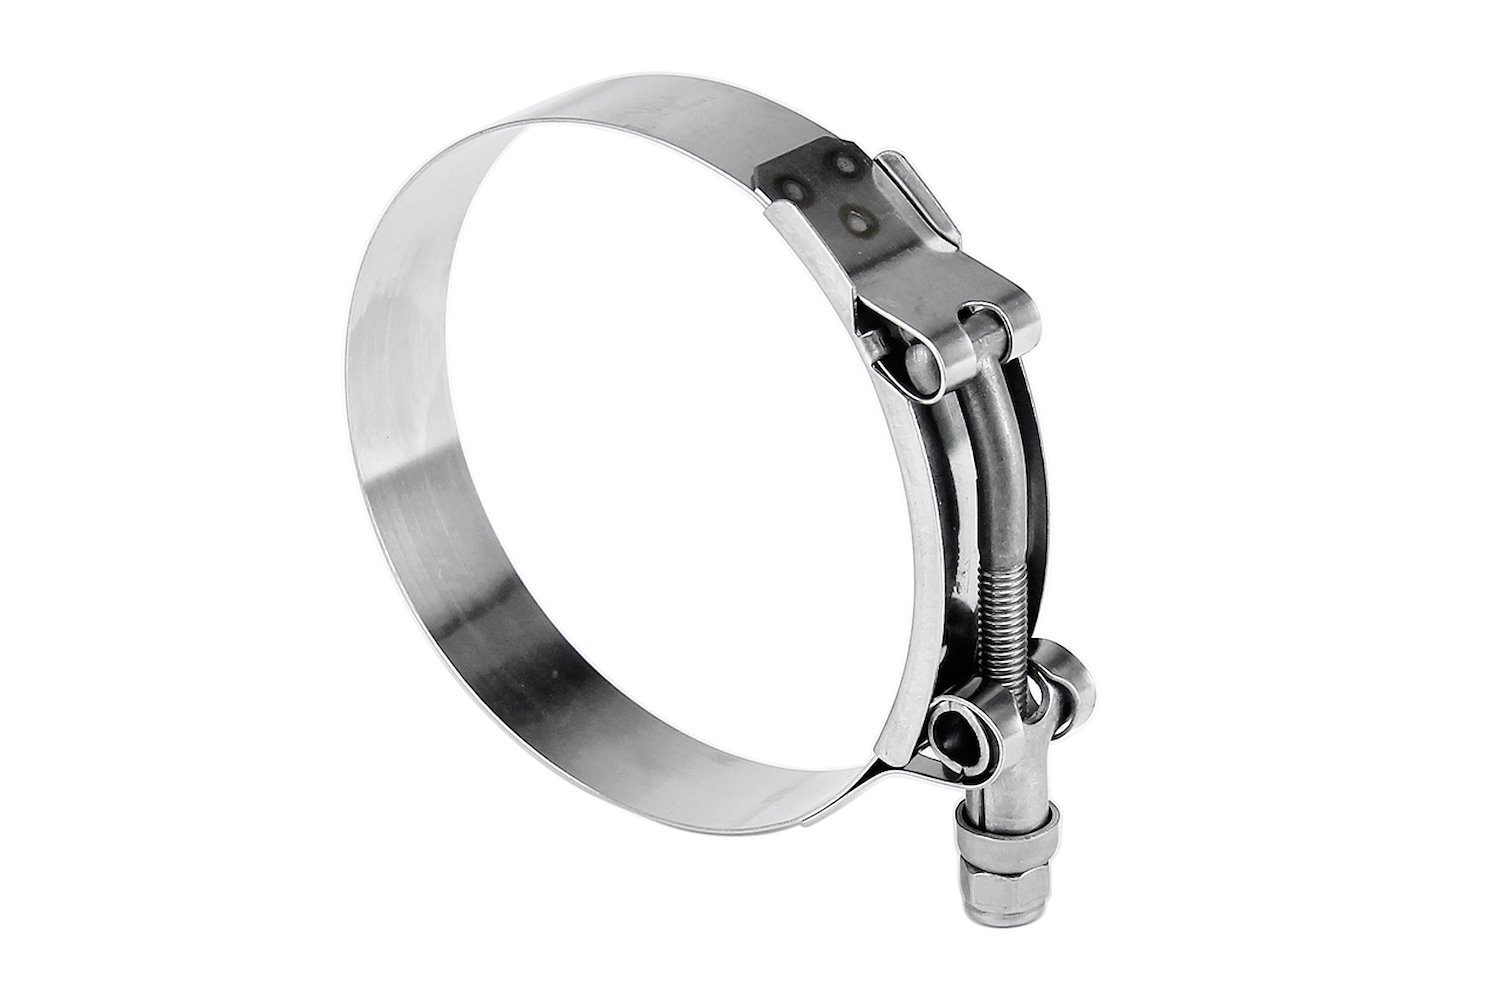 316-SSTC-102-110 100-Percent Marine Grade Stainless Steel T-Bolt Hose Clamp, Size #102, Range: 4.06 in.- 4.38 in.